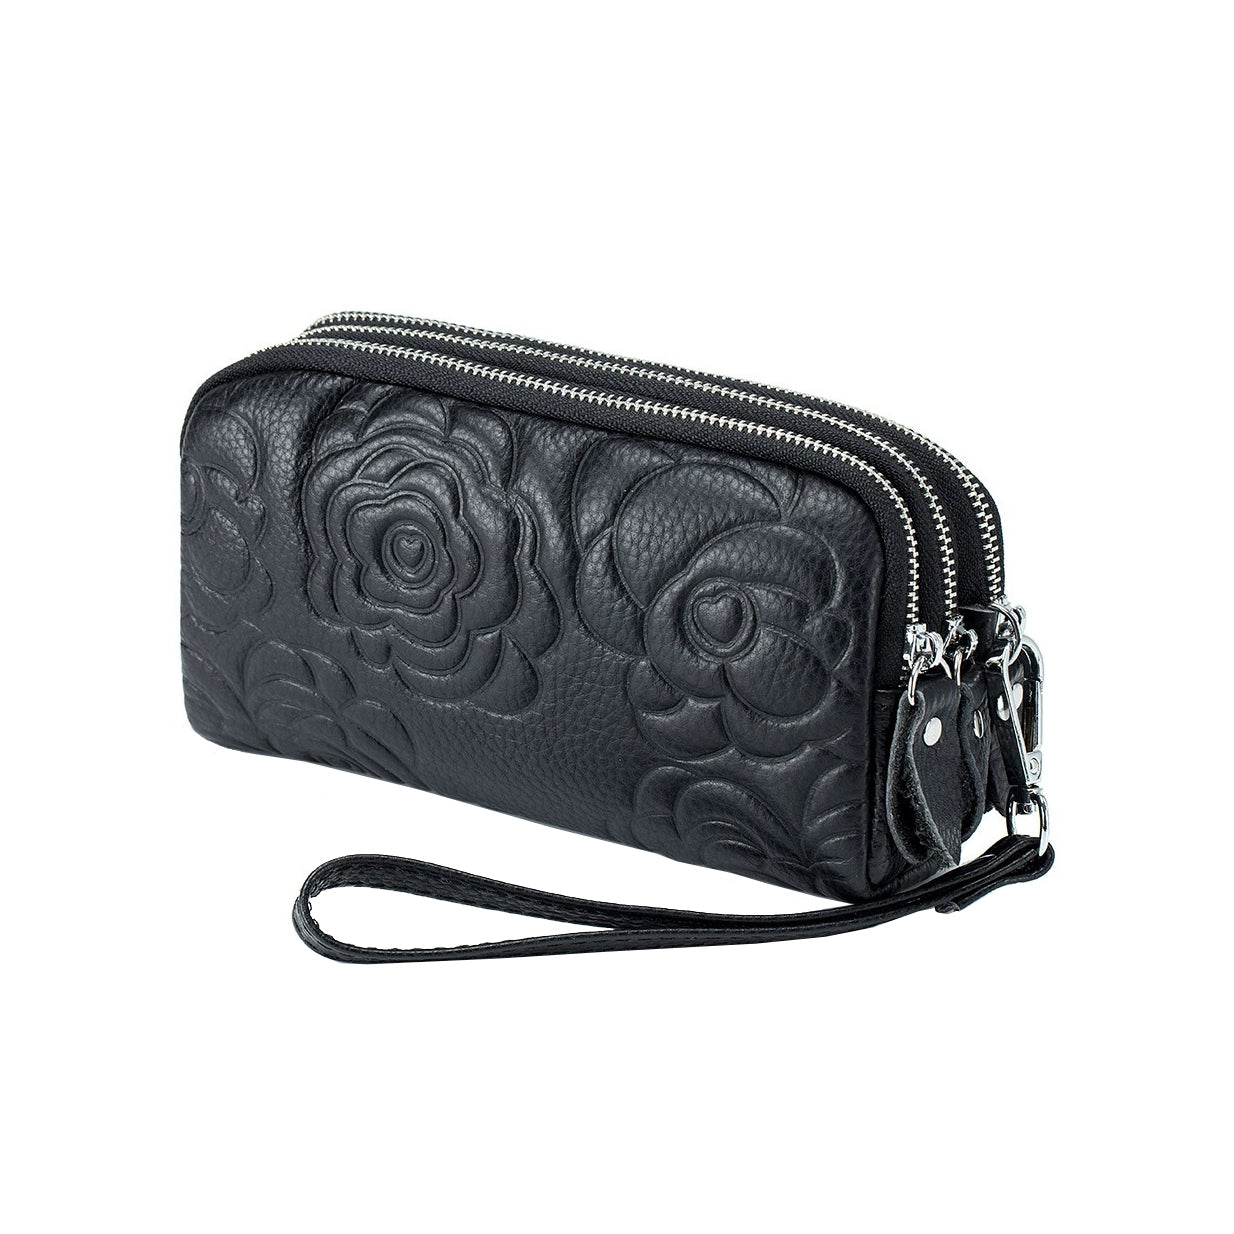 Women's cowhide leather floral pouch with triple zip